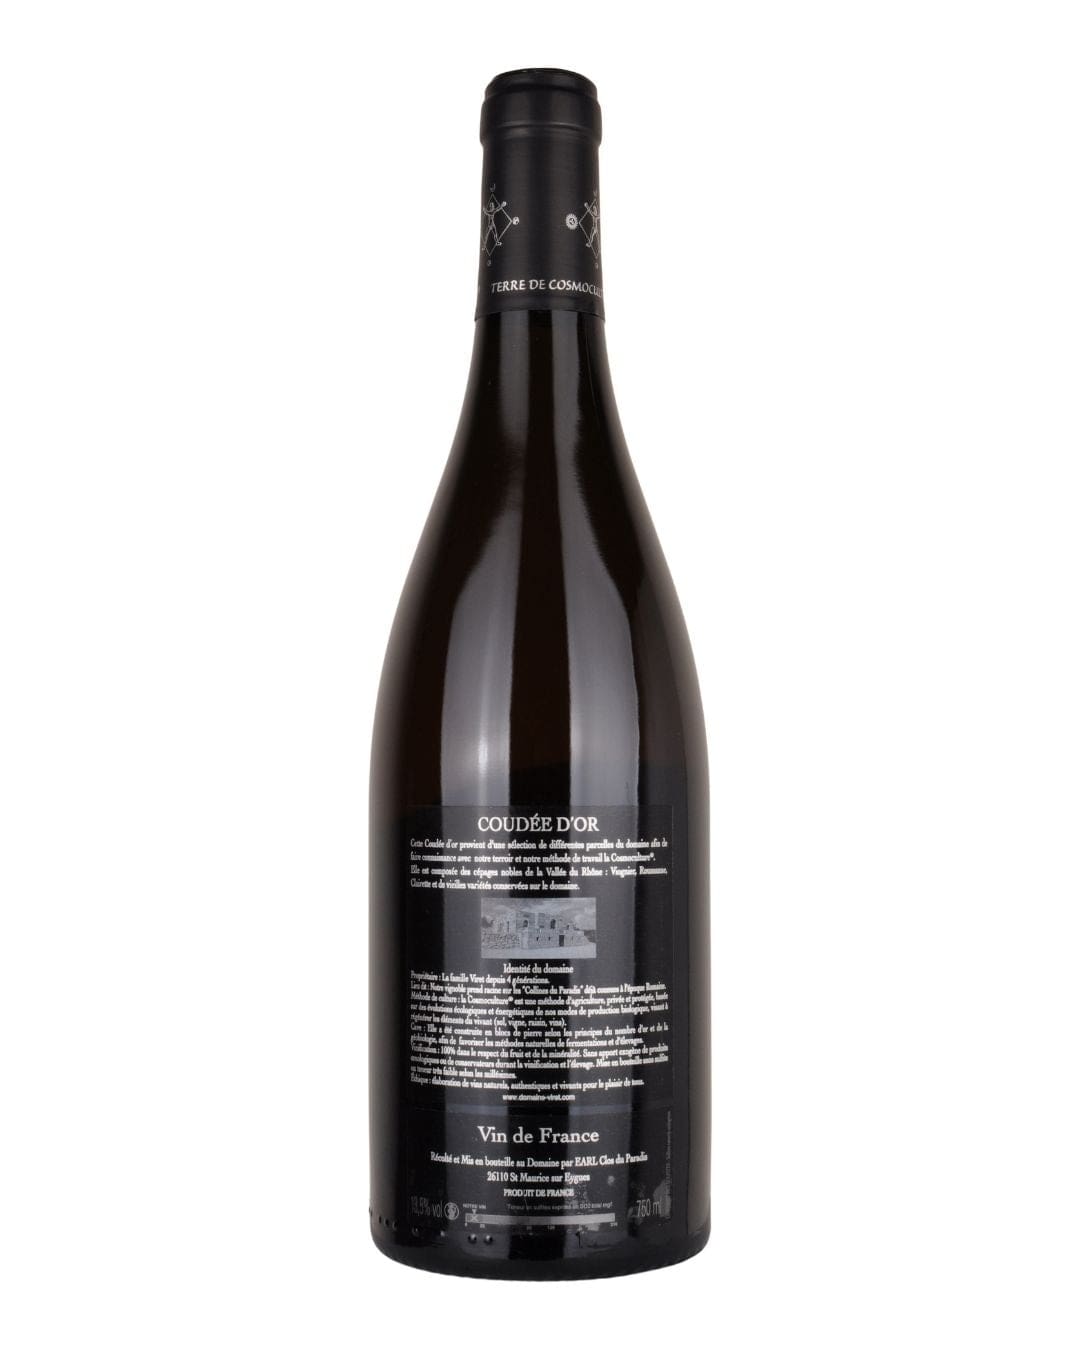 Shop Domaine Viret Domaine Viret La Coudee d'Or 2015 online at PENTICTON artisanal French wine store in Hong Kong. Discover other French wines, promotions, workshops and featured offers at pentictonpacific.com 